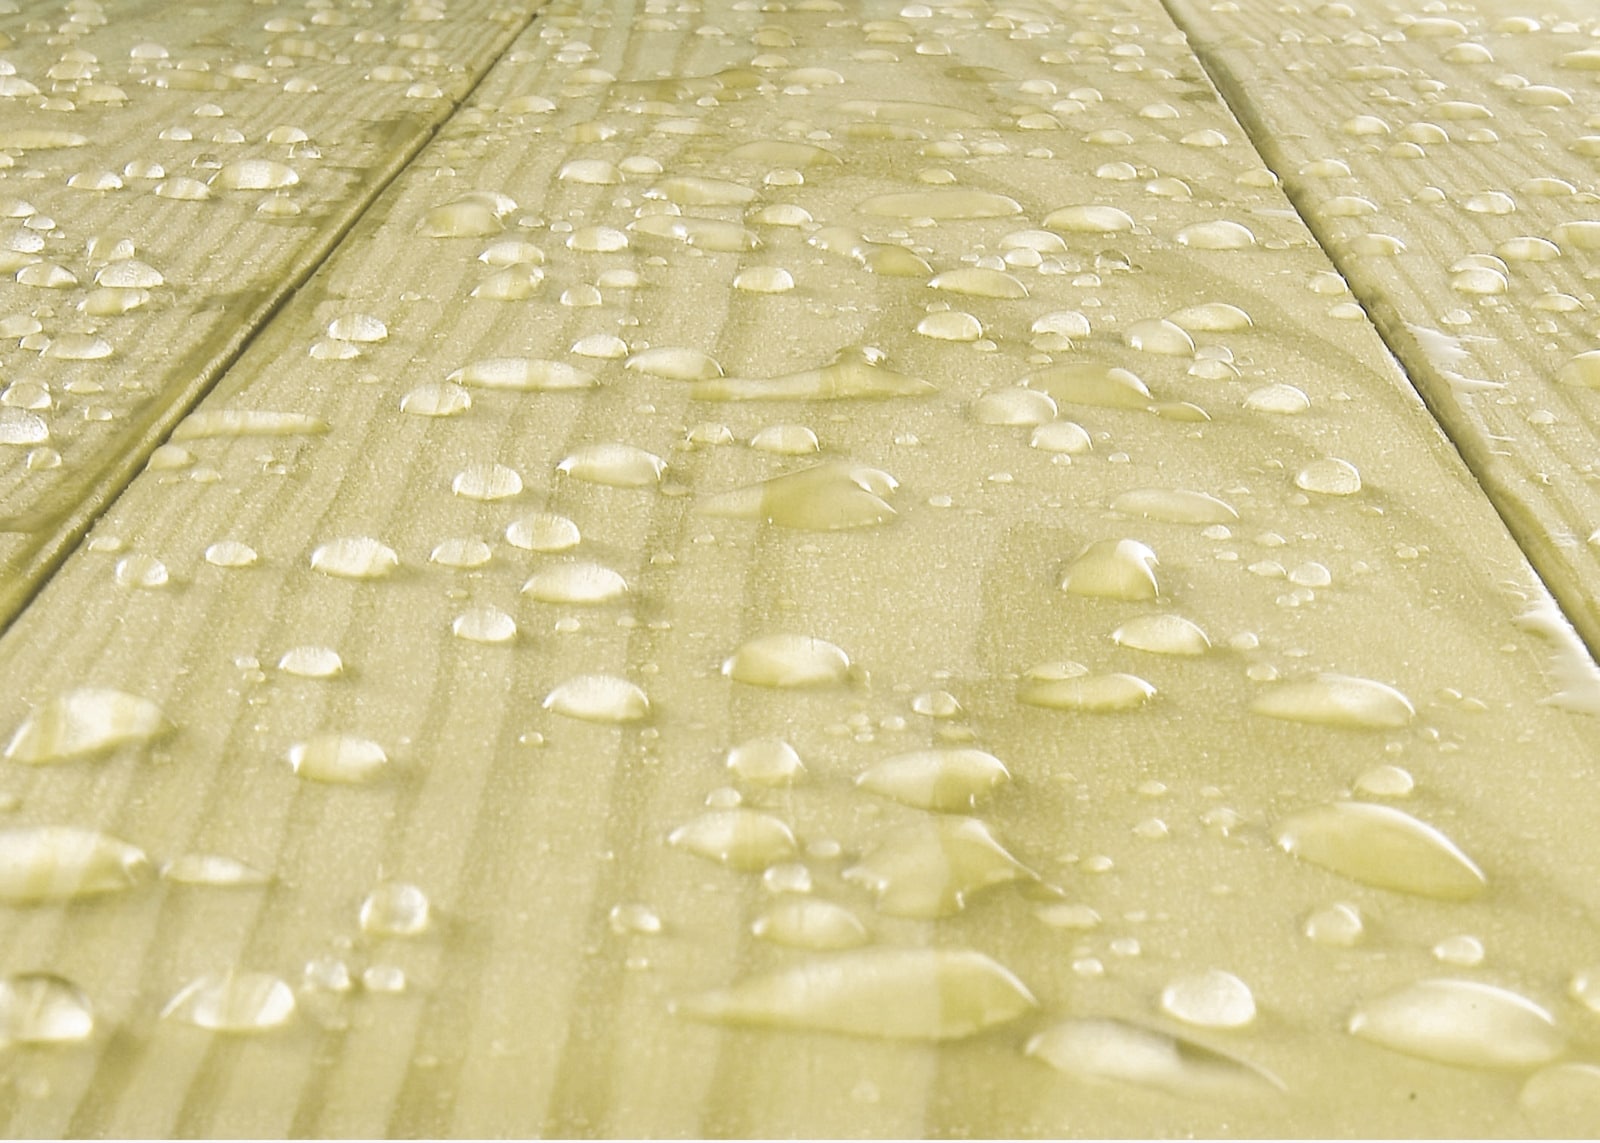 Severe Weather 5 4 In X 6 In X 12 Ft Premium Southern Yellow Pine Deck